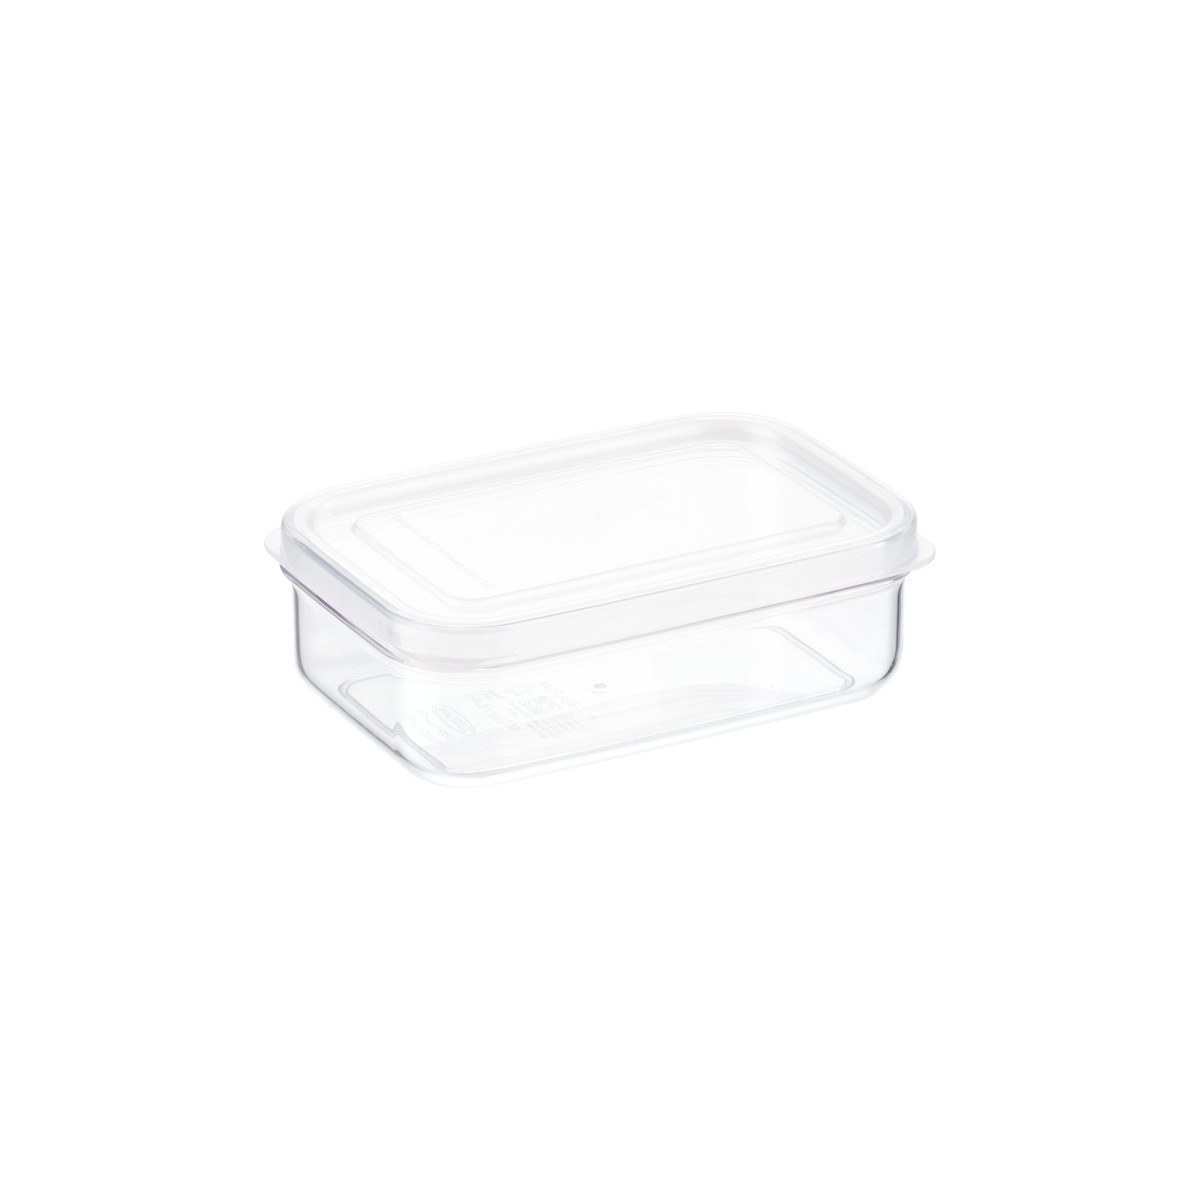 https://www.containerstore.com/catalogimages/308248/10053304-lustroware-clear-food-conta.jpg